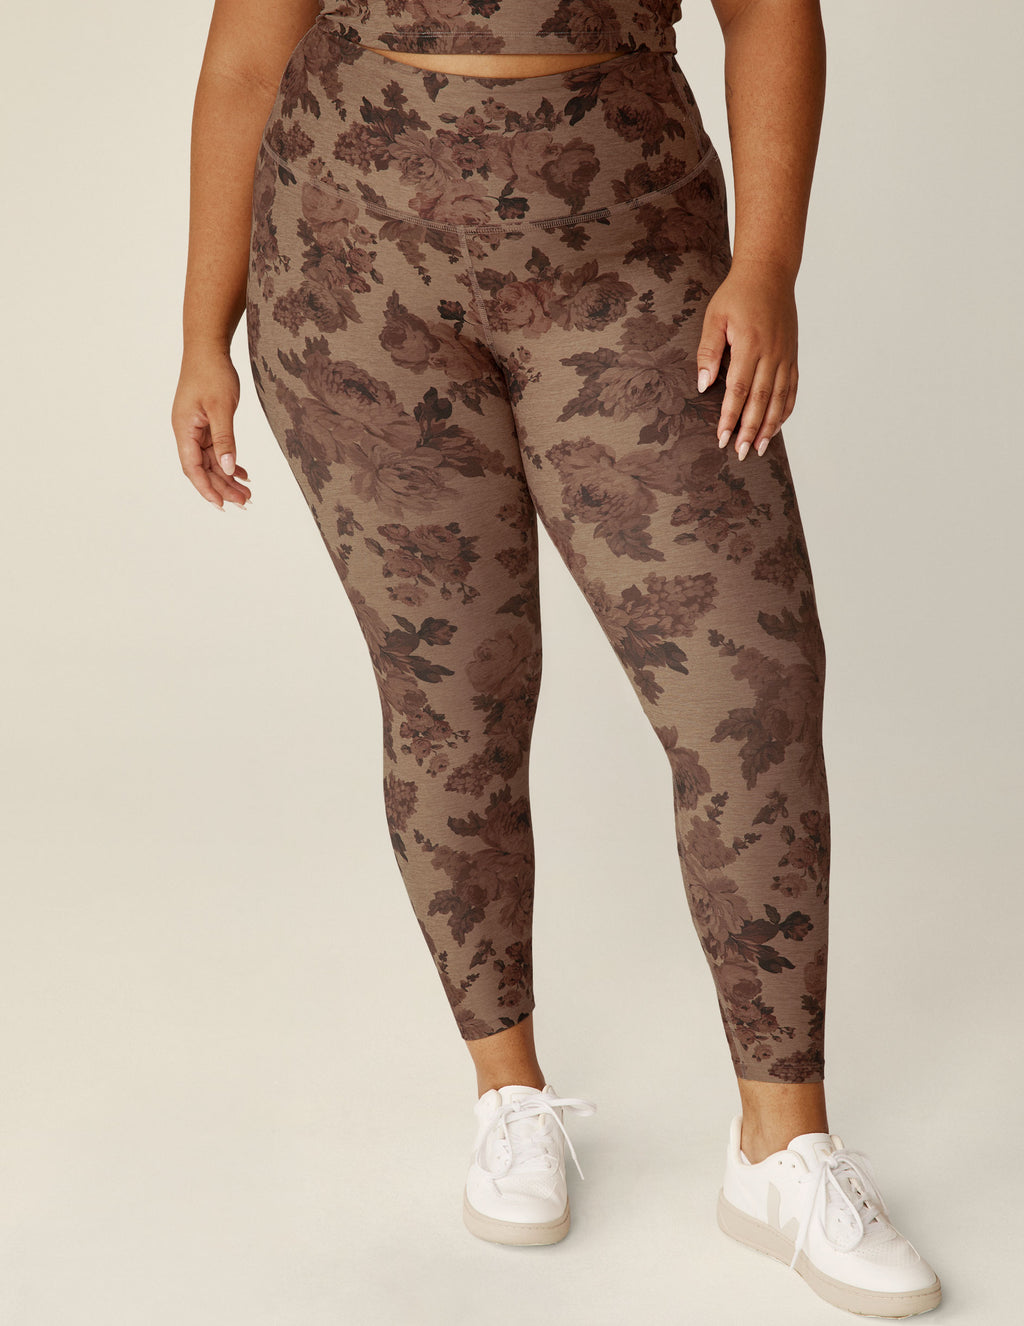 Romantic Floral SoftMark High Waisted Midi Legging Featured Image